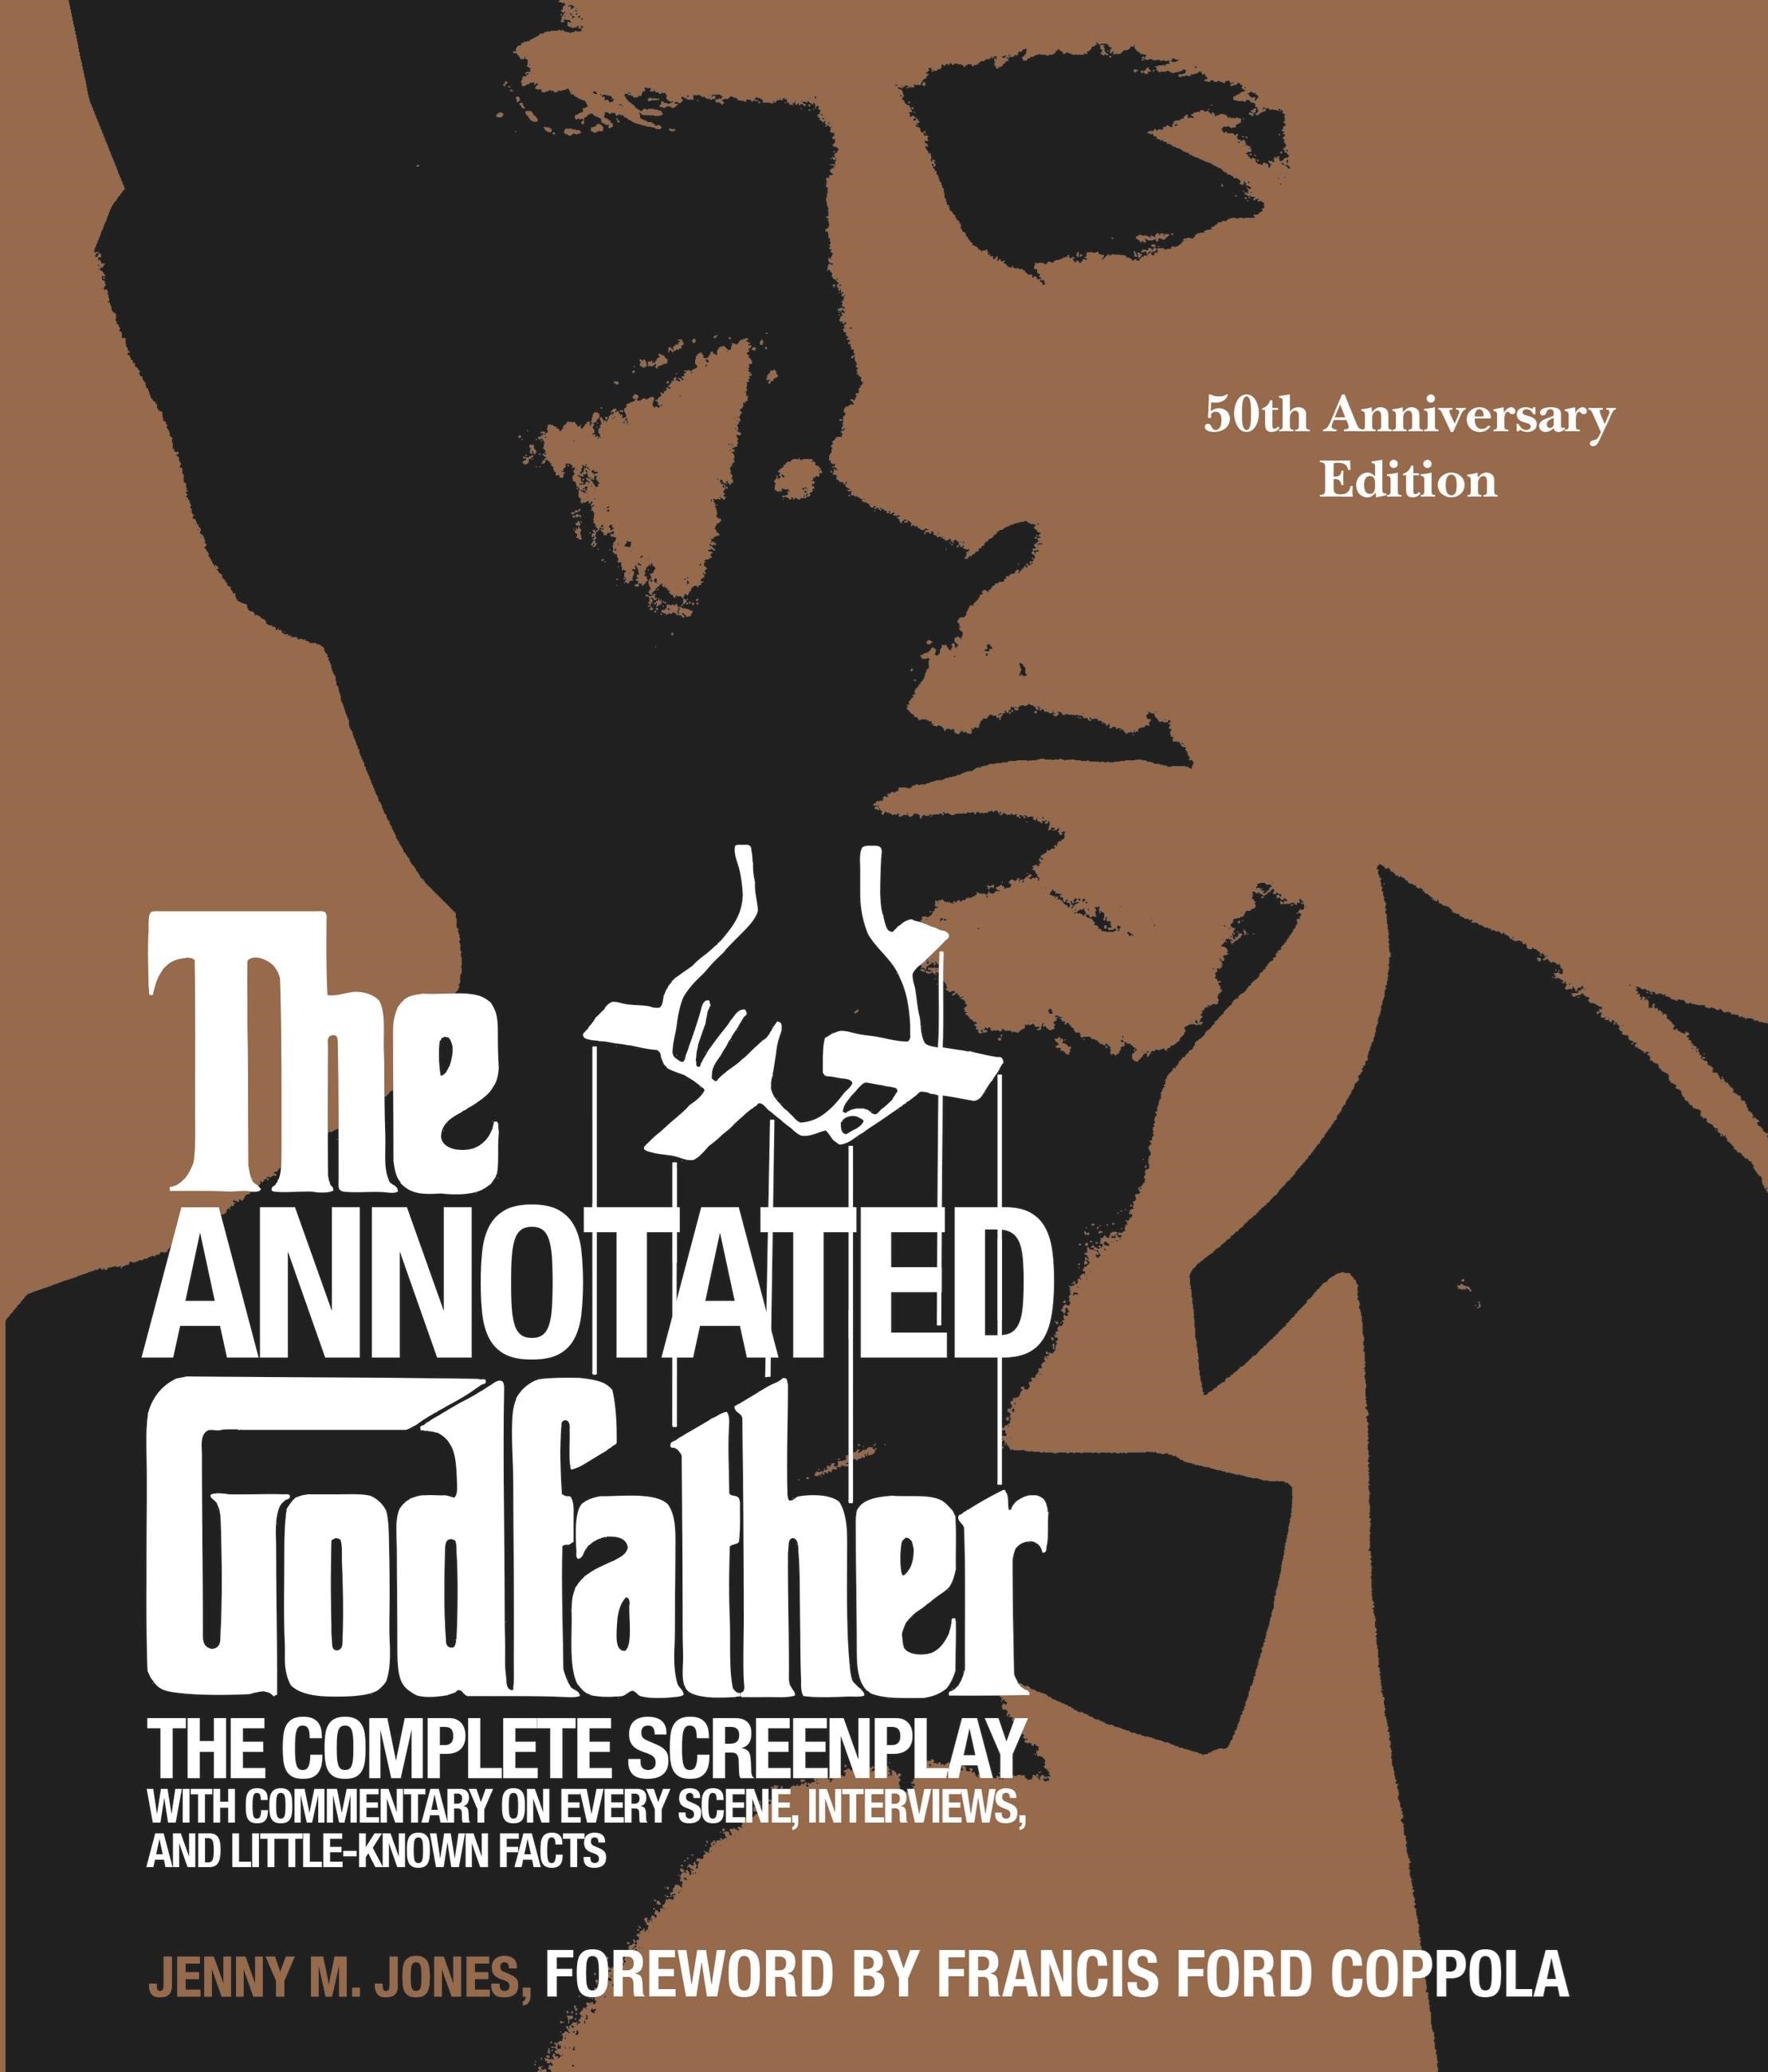 The Annotated Godfather (50th Anniversary Edition): The Complete Screenplay, Commentary on Every Scene, Interviews, and Little-Known Facts (Special edition)